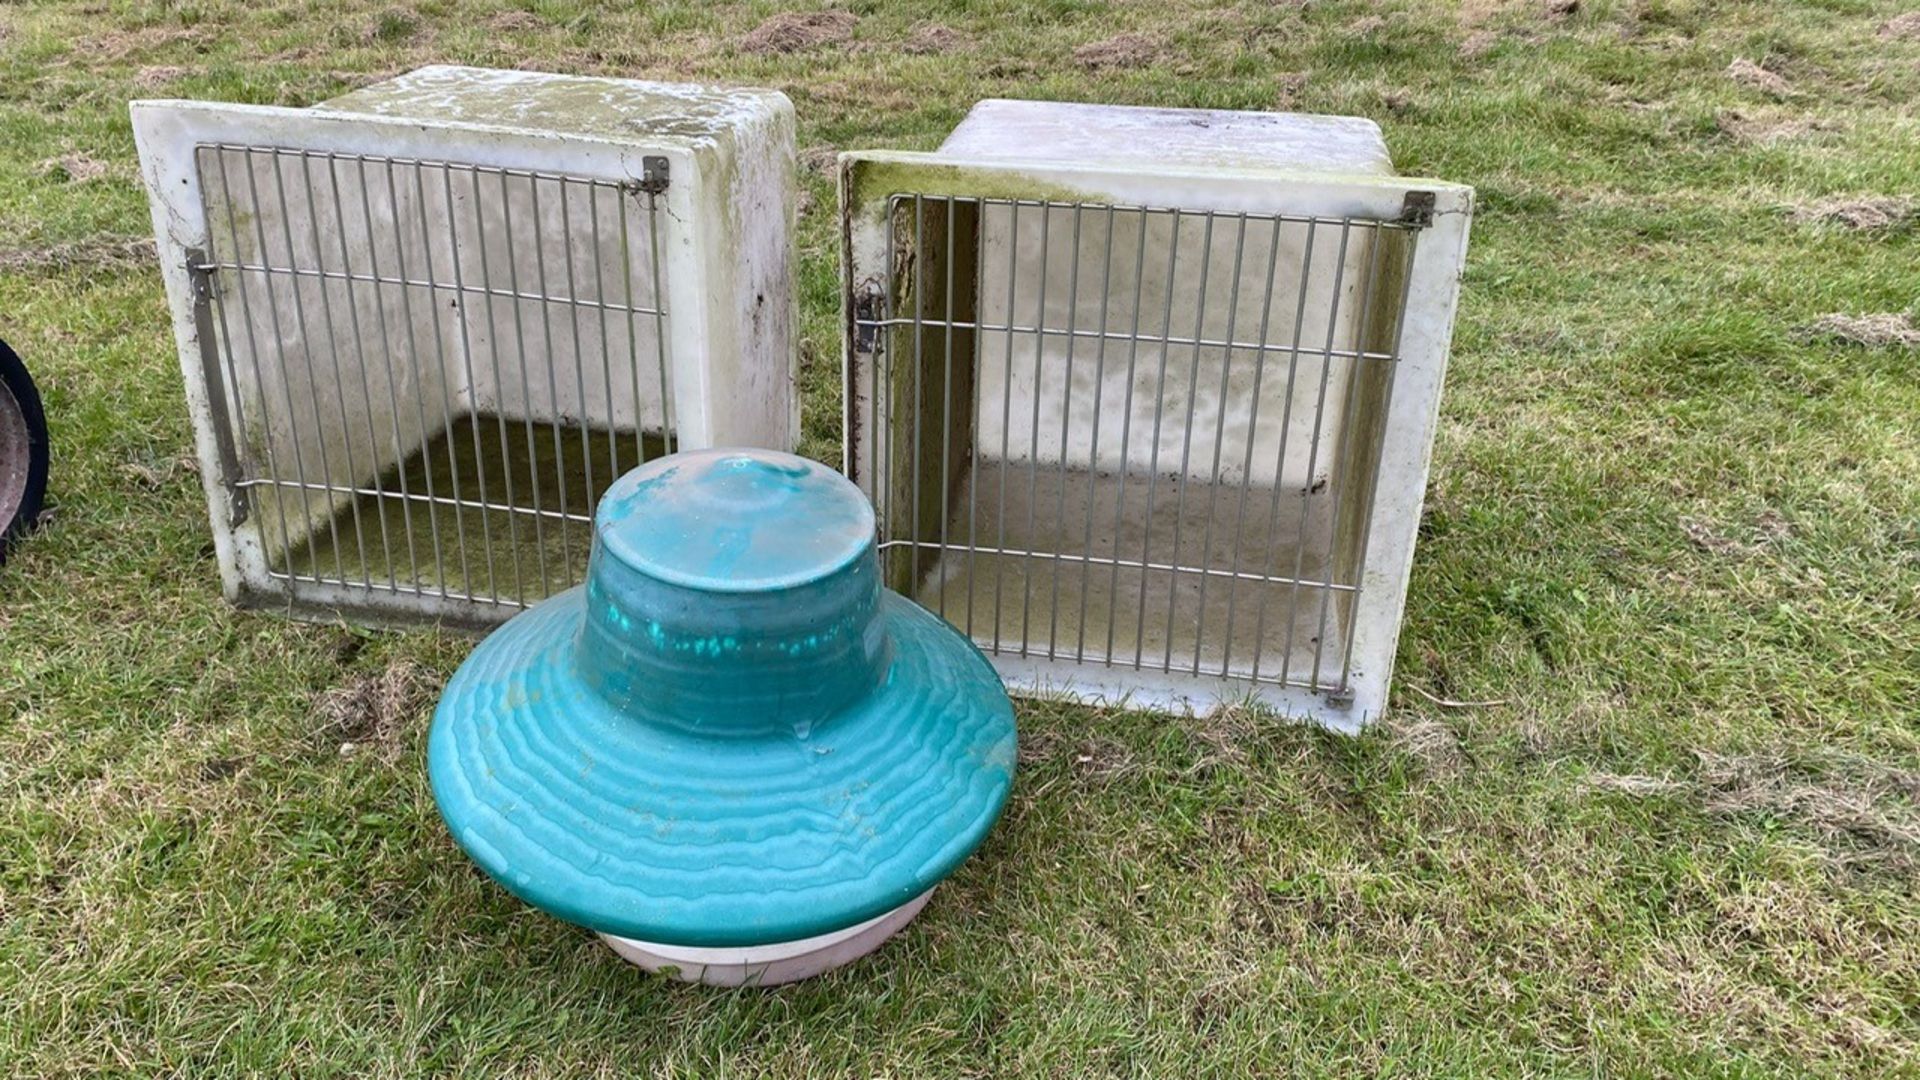 2 Dog Crates & Poultry Feeder